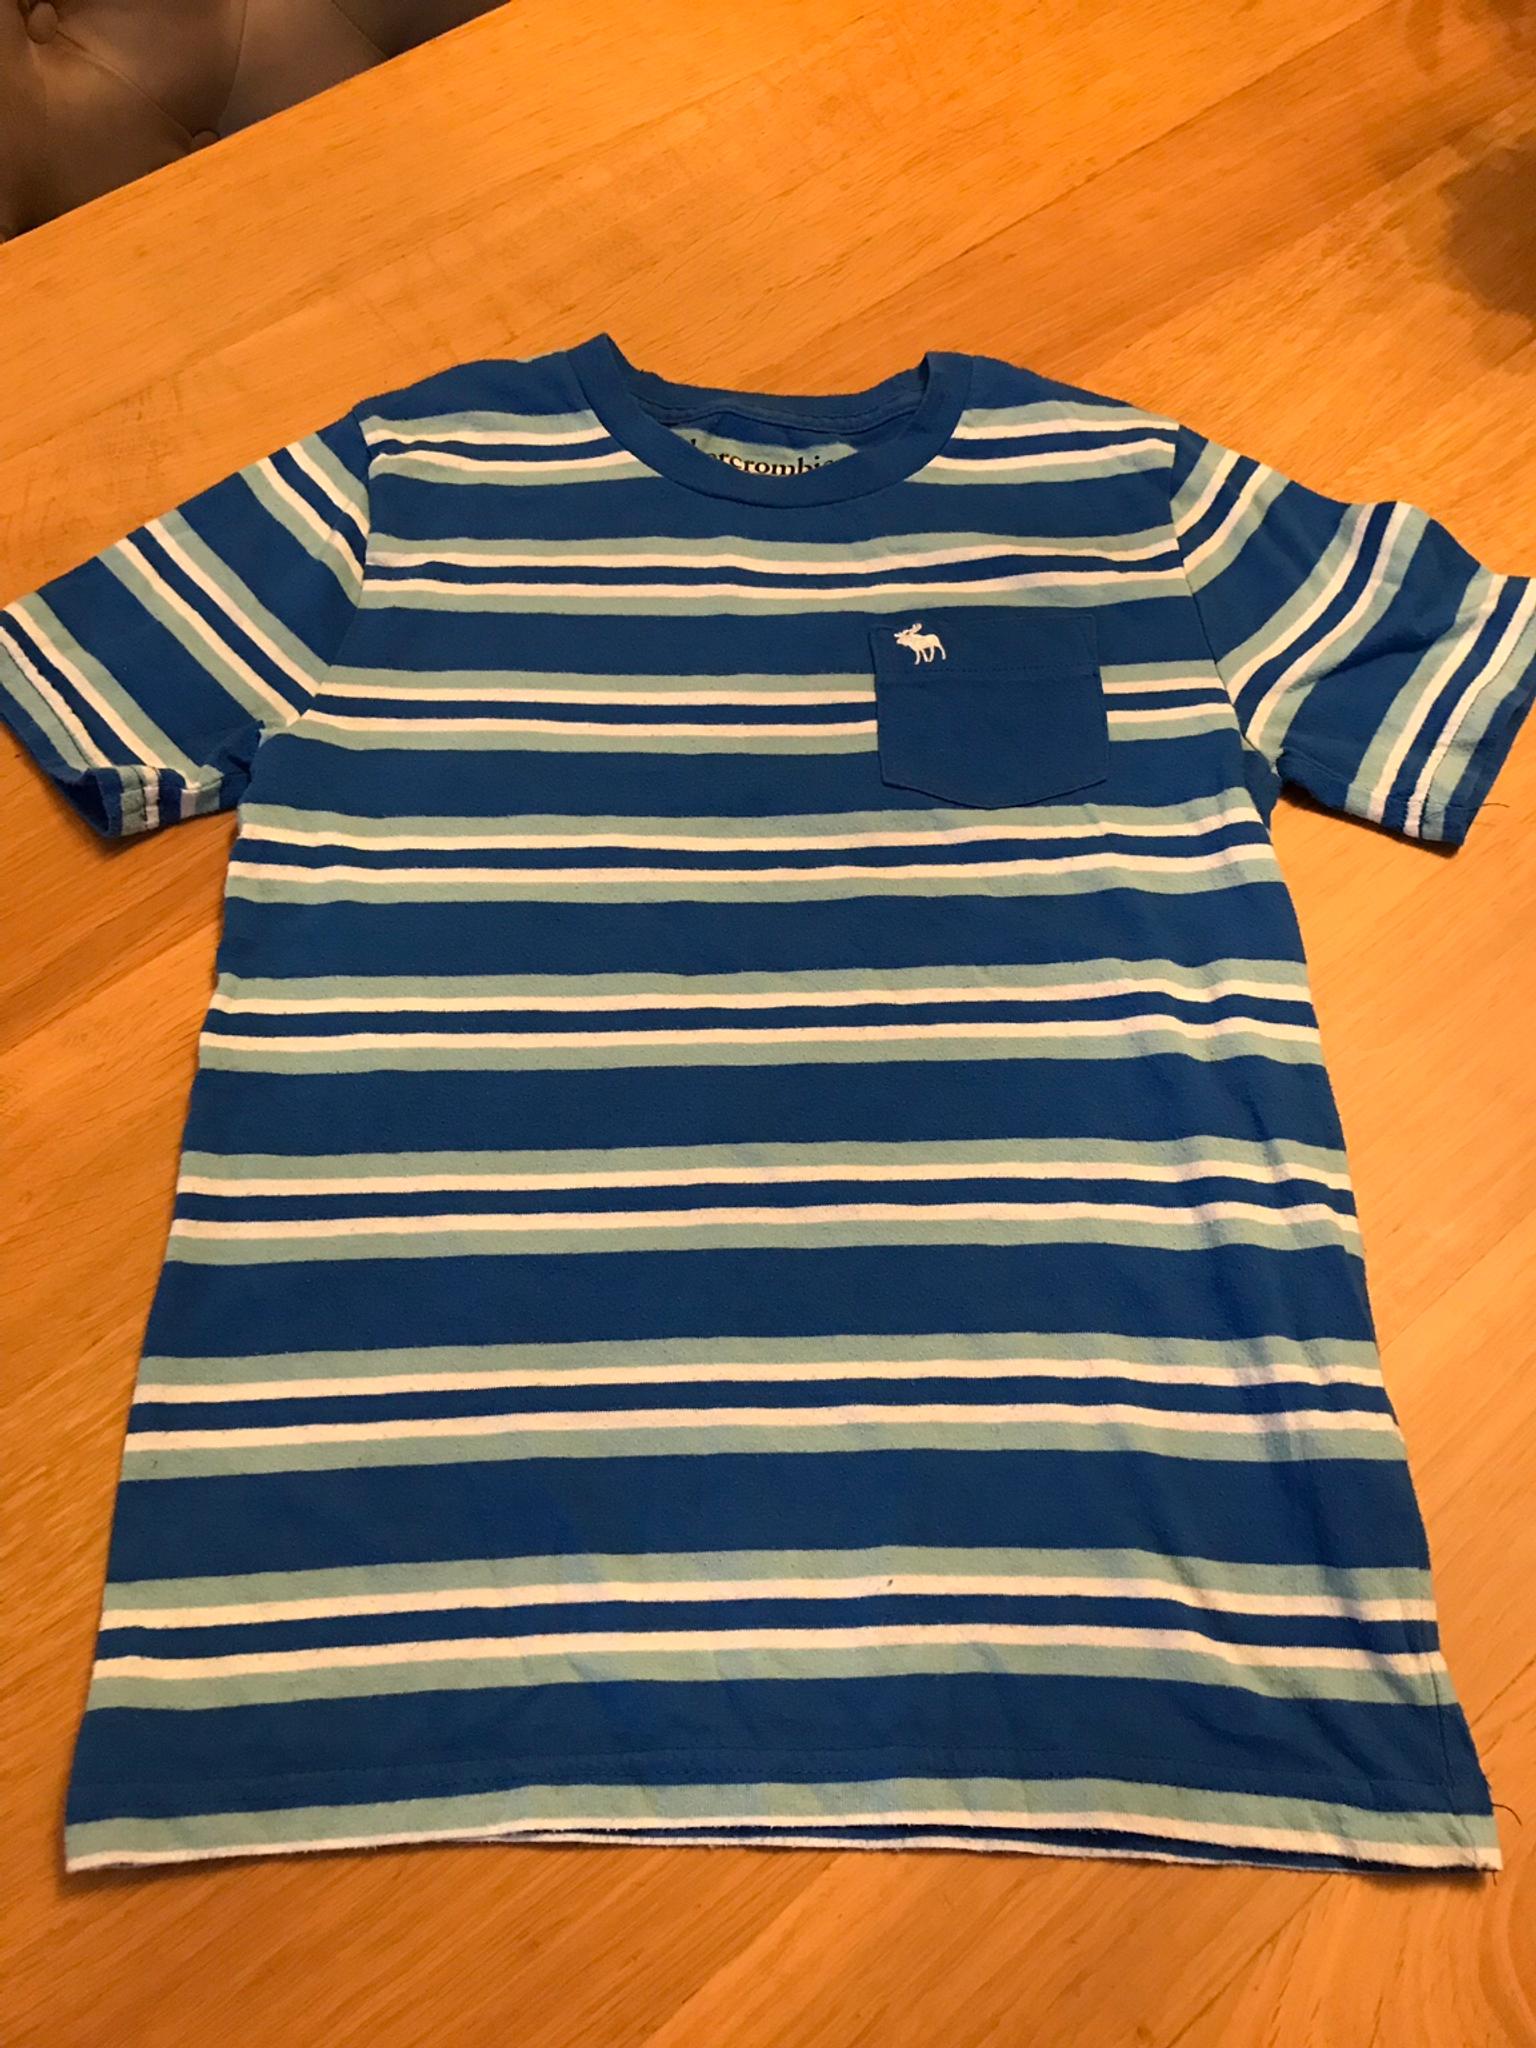 abercrombie and fitch striped t shirt